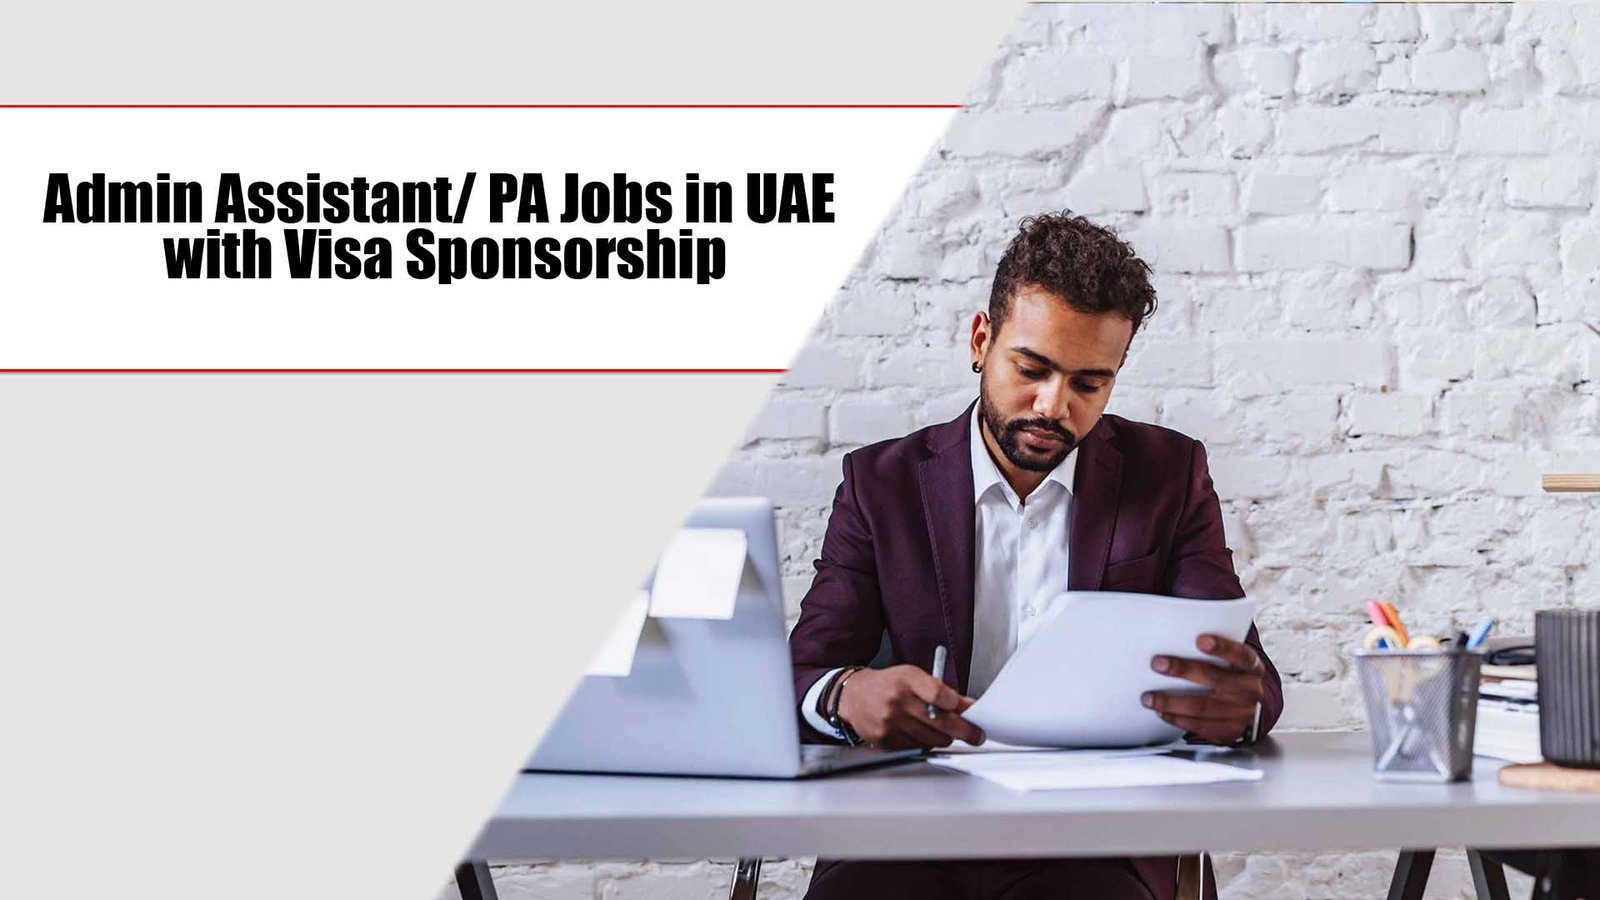 Admin Assistant/PA Jobs in UAE with Visa Sponsorship and Free Ticket